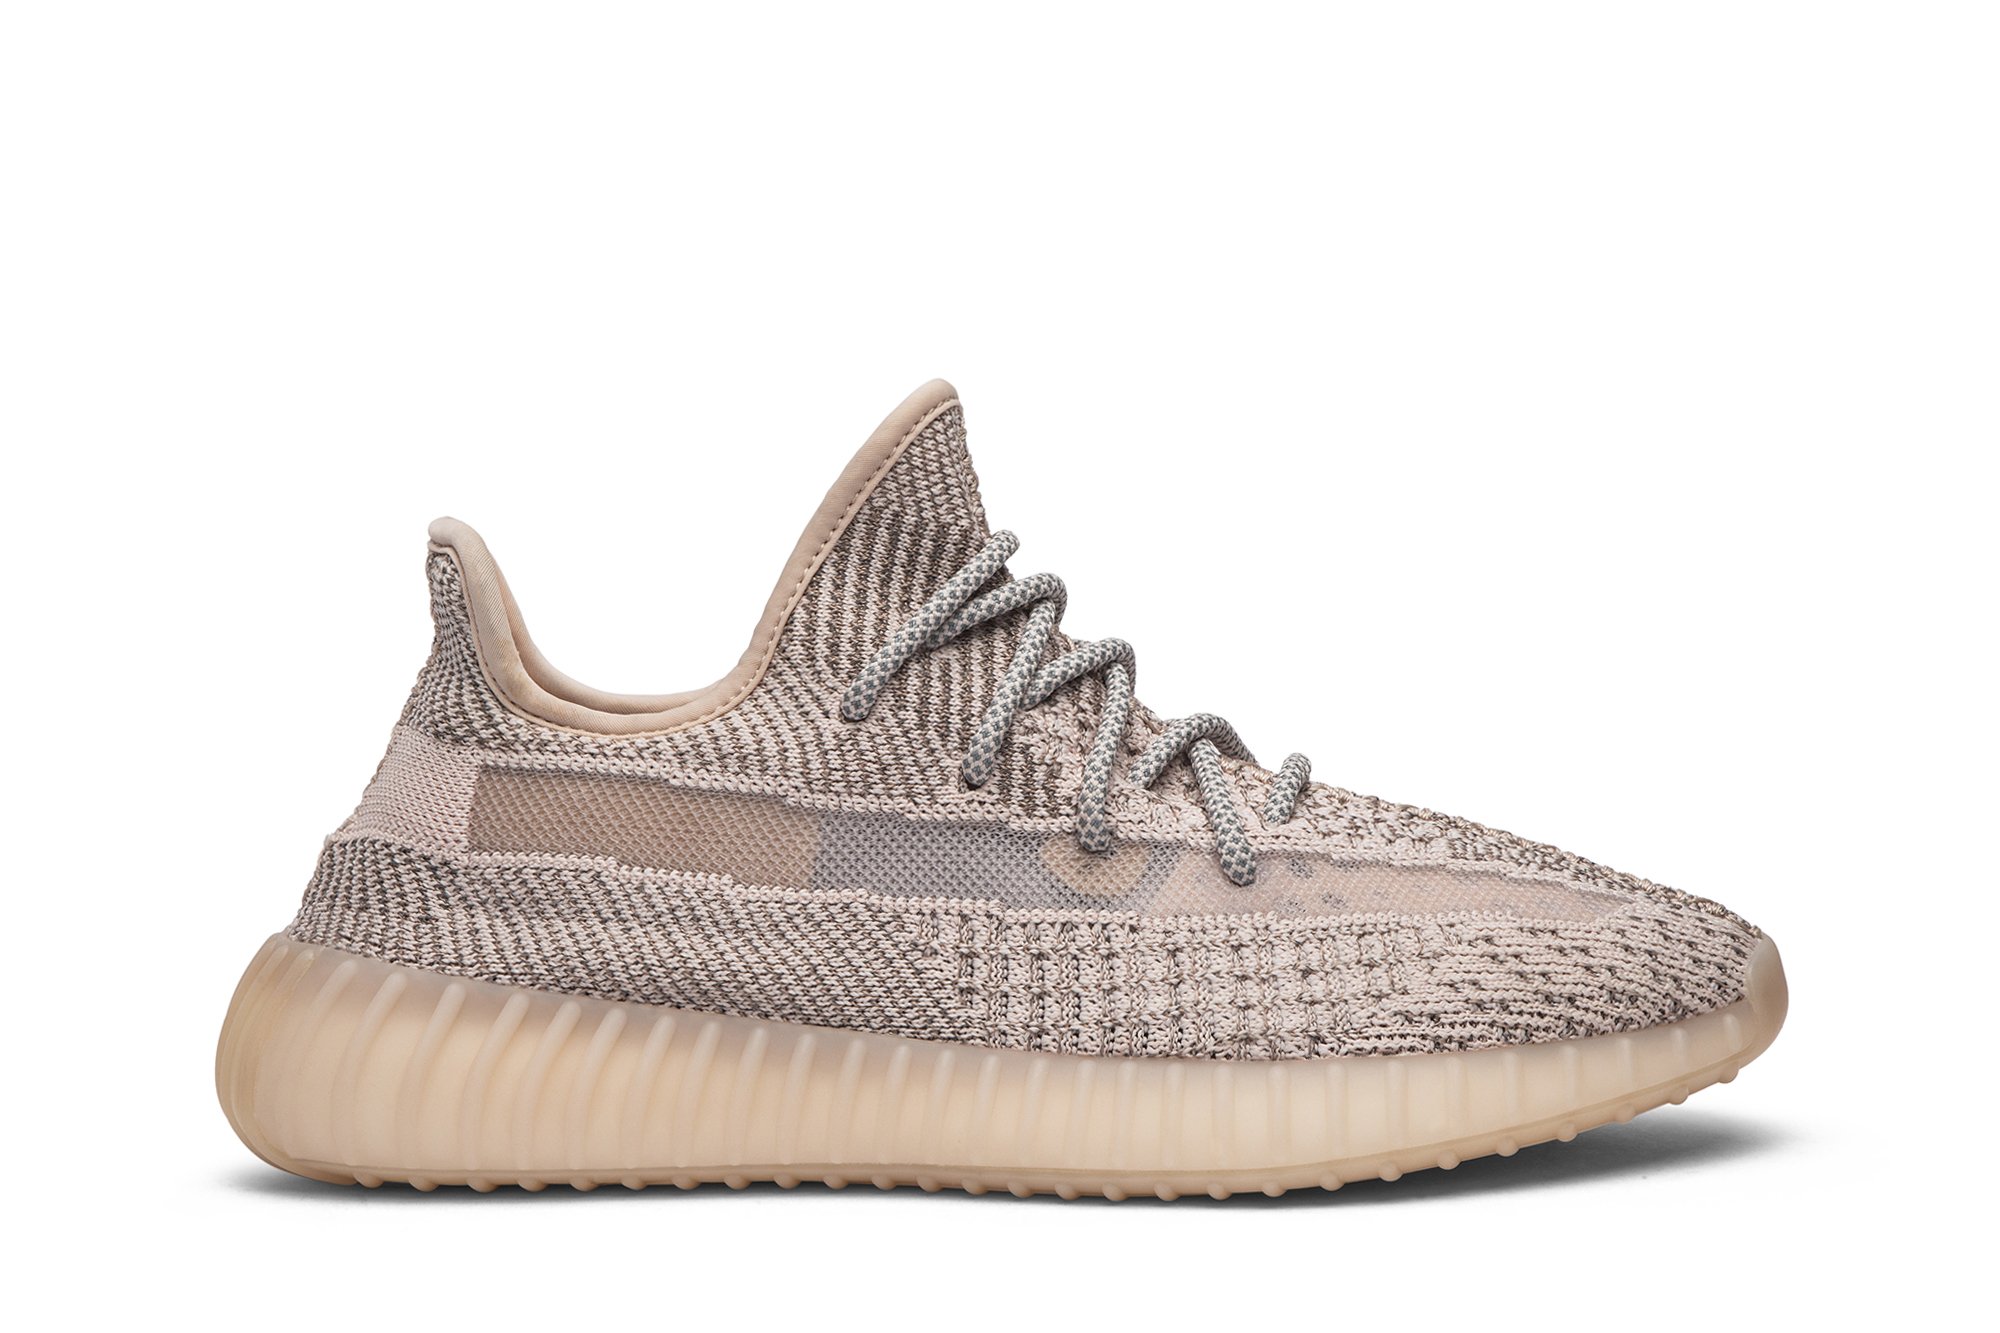 Yeezy Boost 350 V2 'Synth Reflective' | GOAT